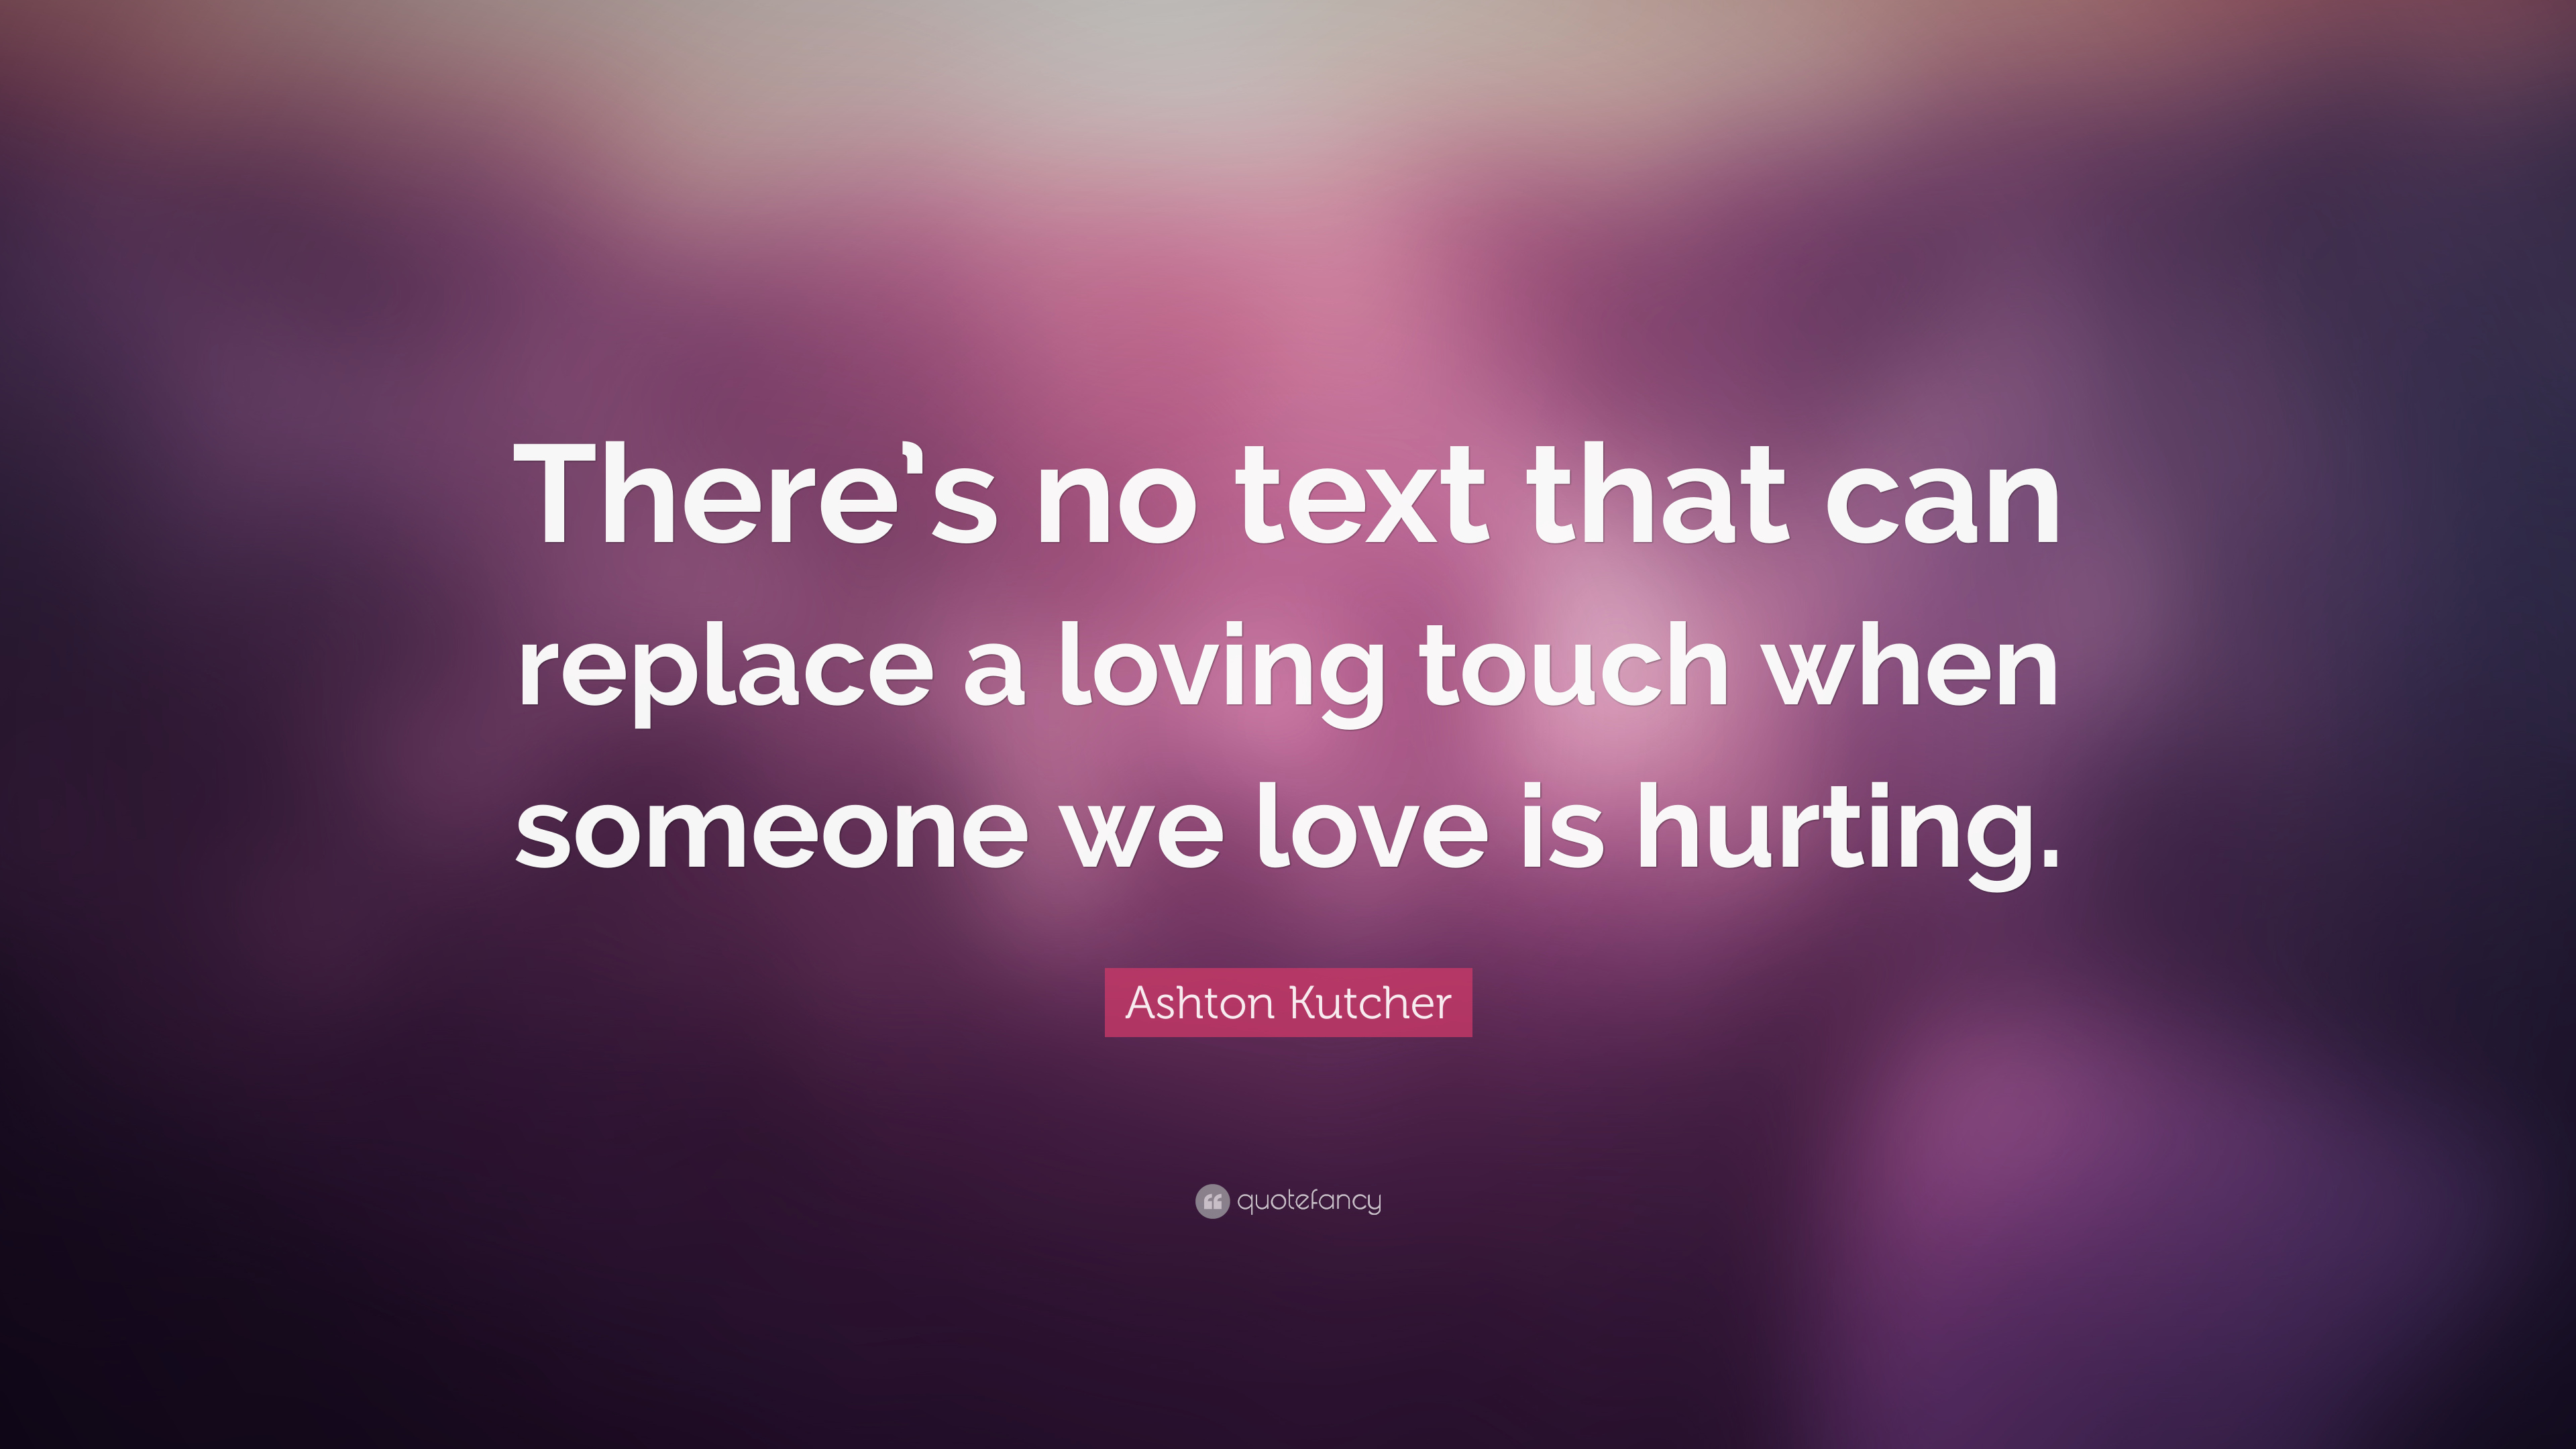 Ashton Kutcher Quote: “There's no text that can replace a loving ...